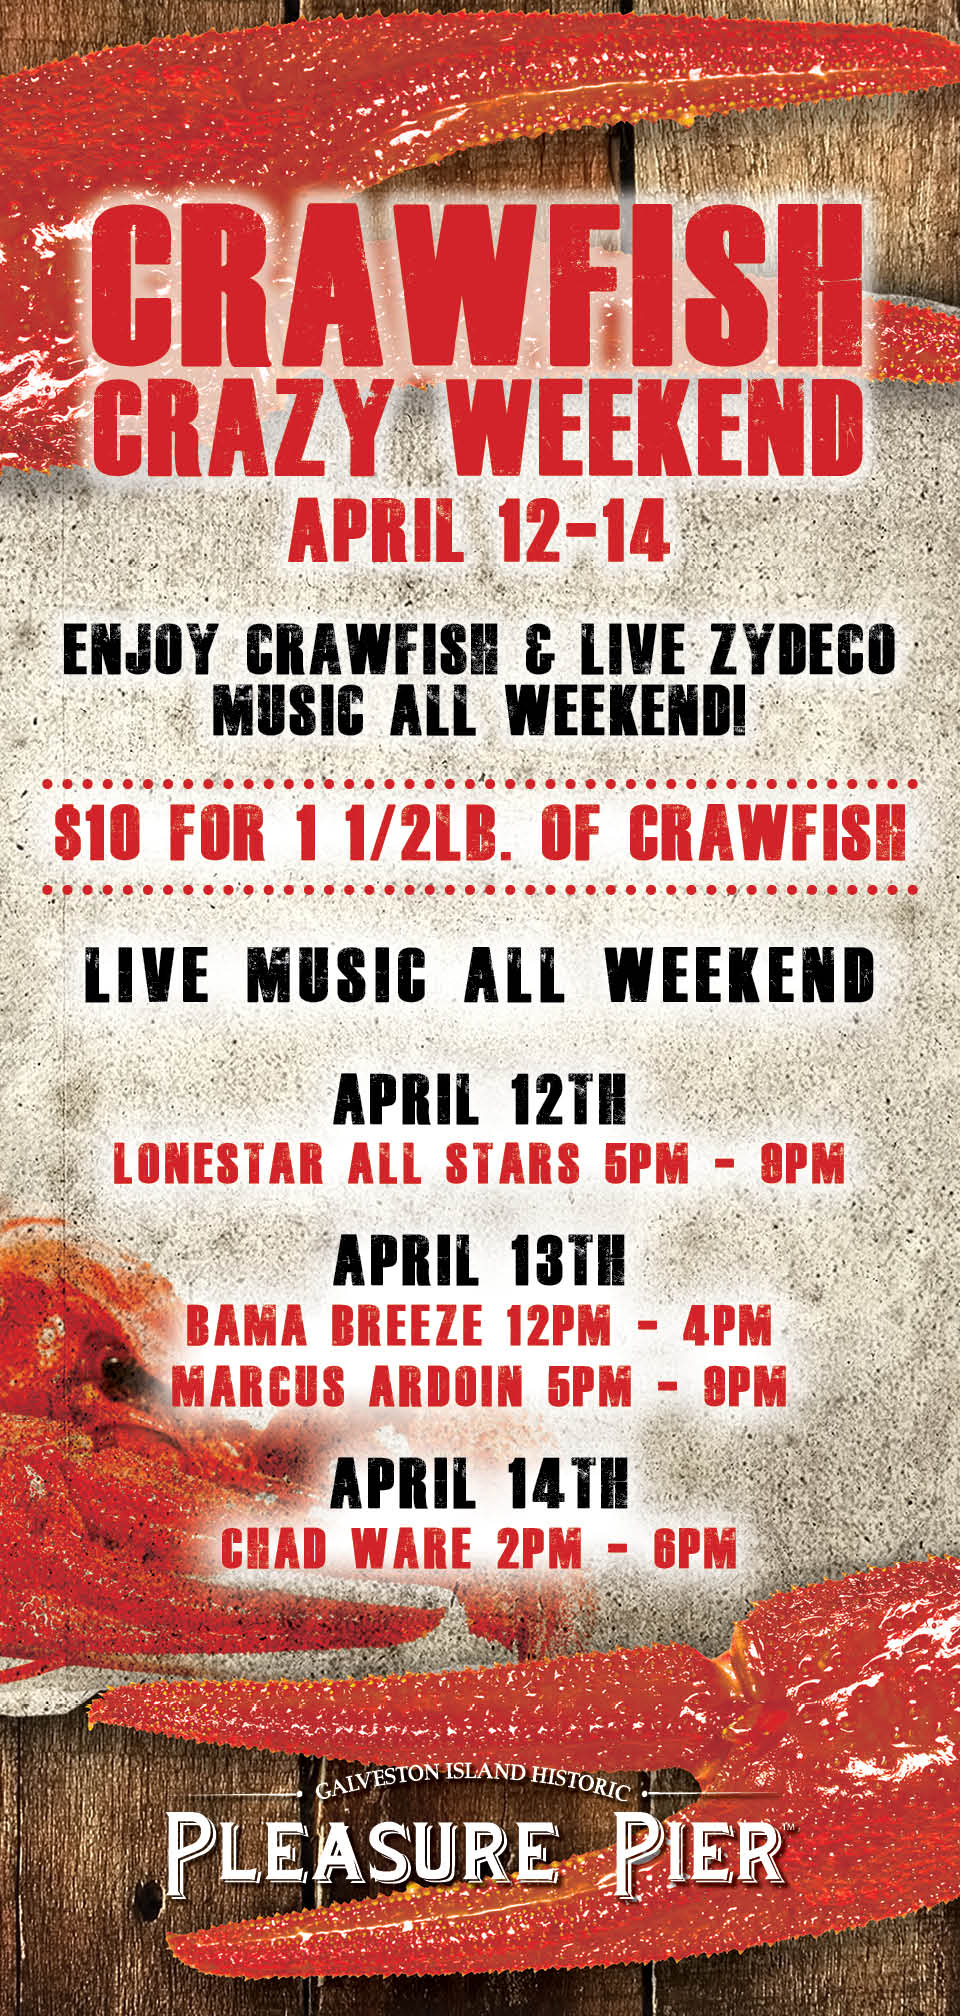 crawfish crazy weekend april 12th to 14th. Enjoy crawfish and live zydeco music all weekend!